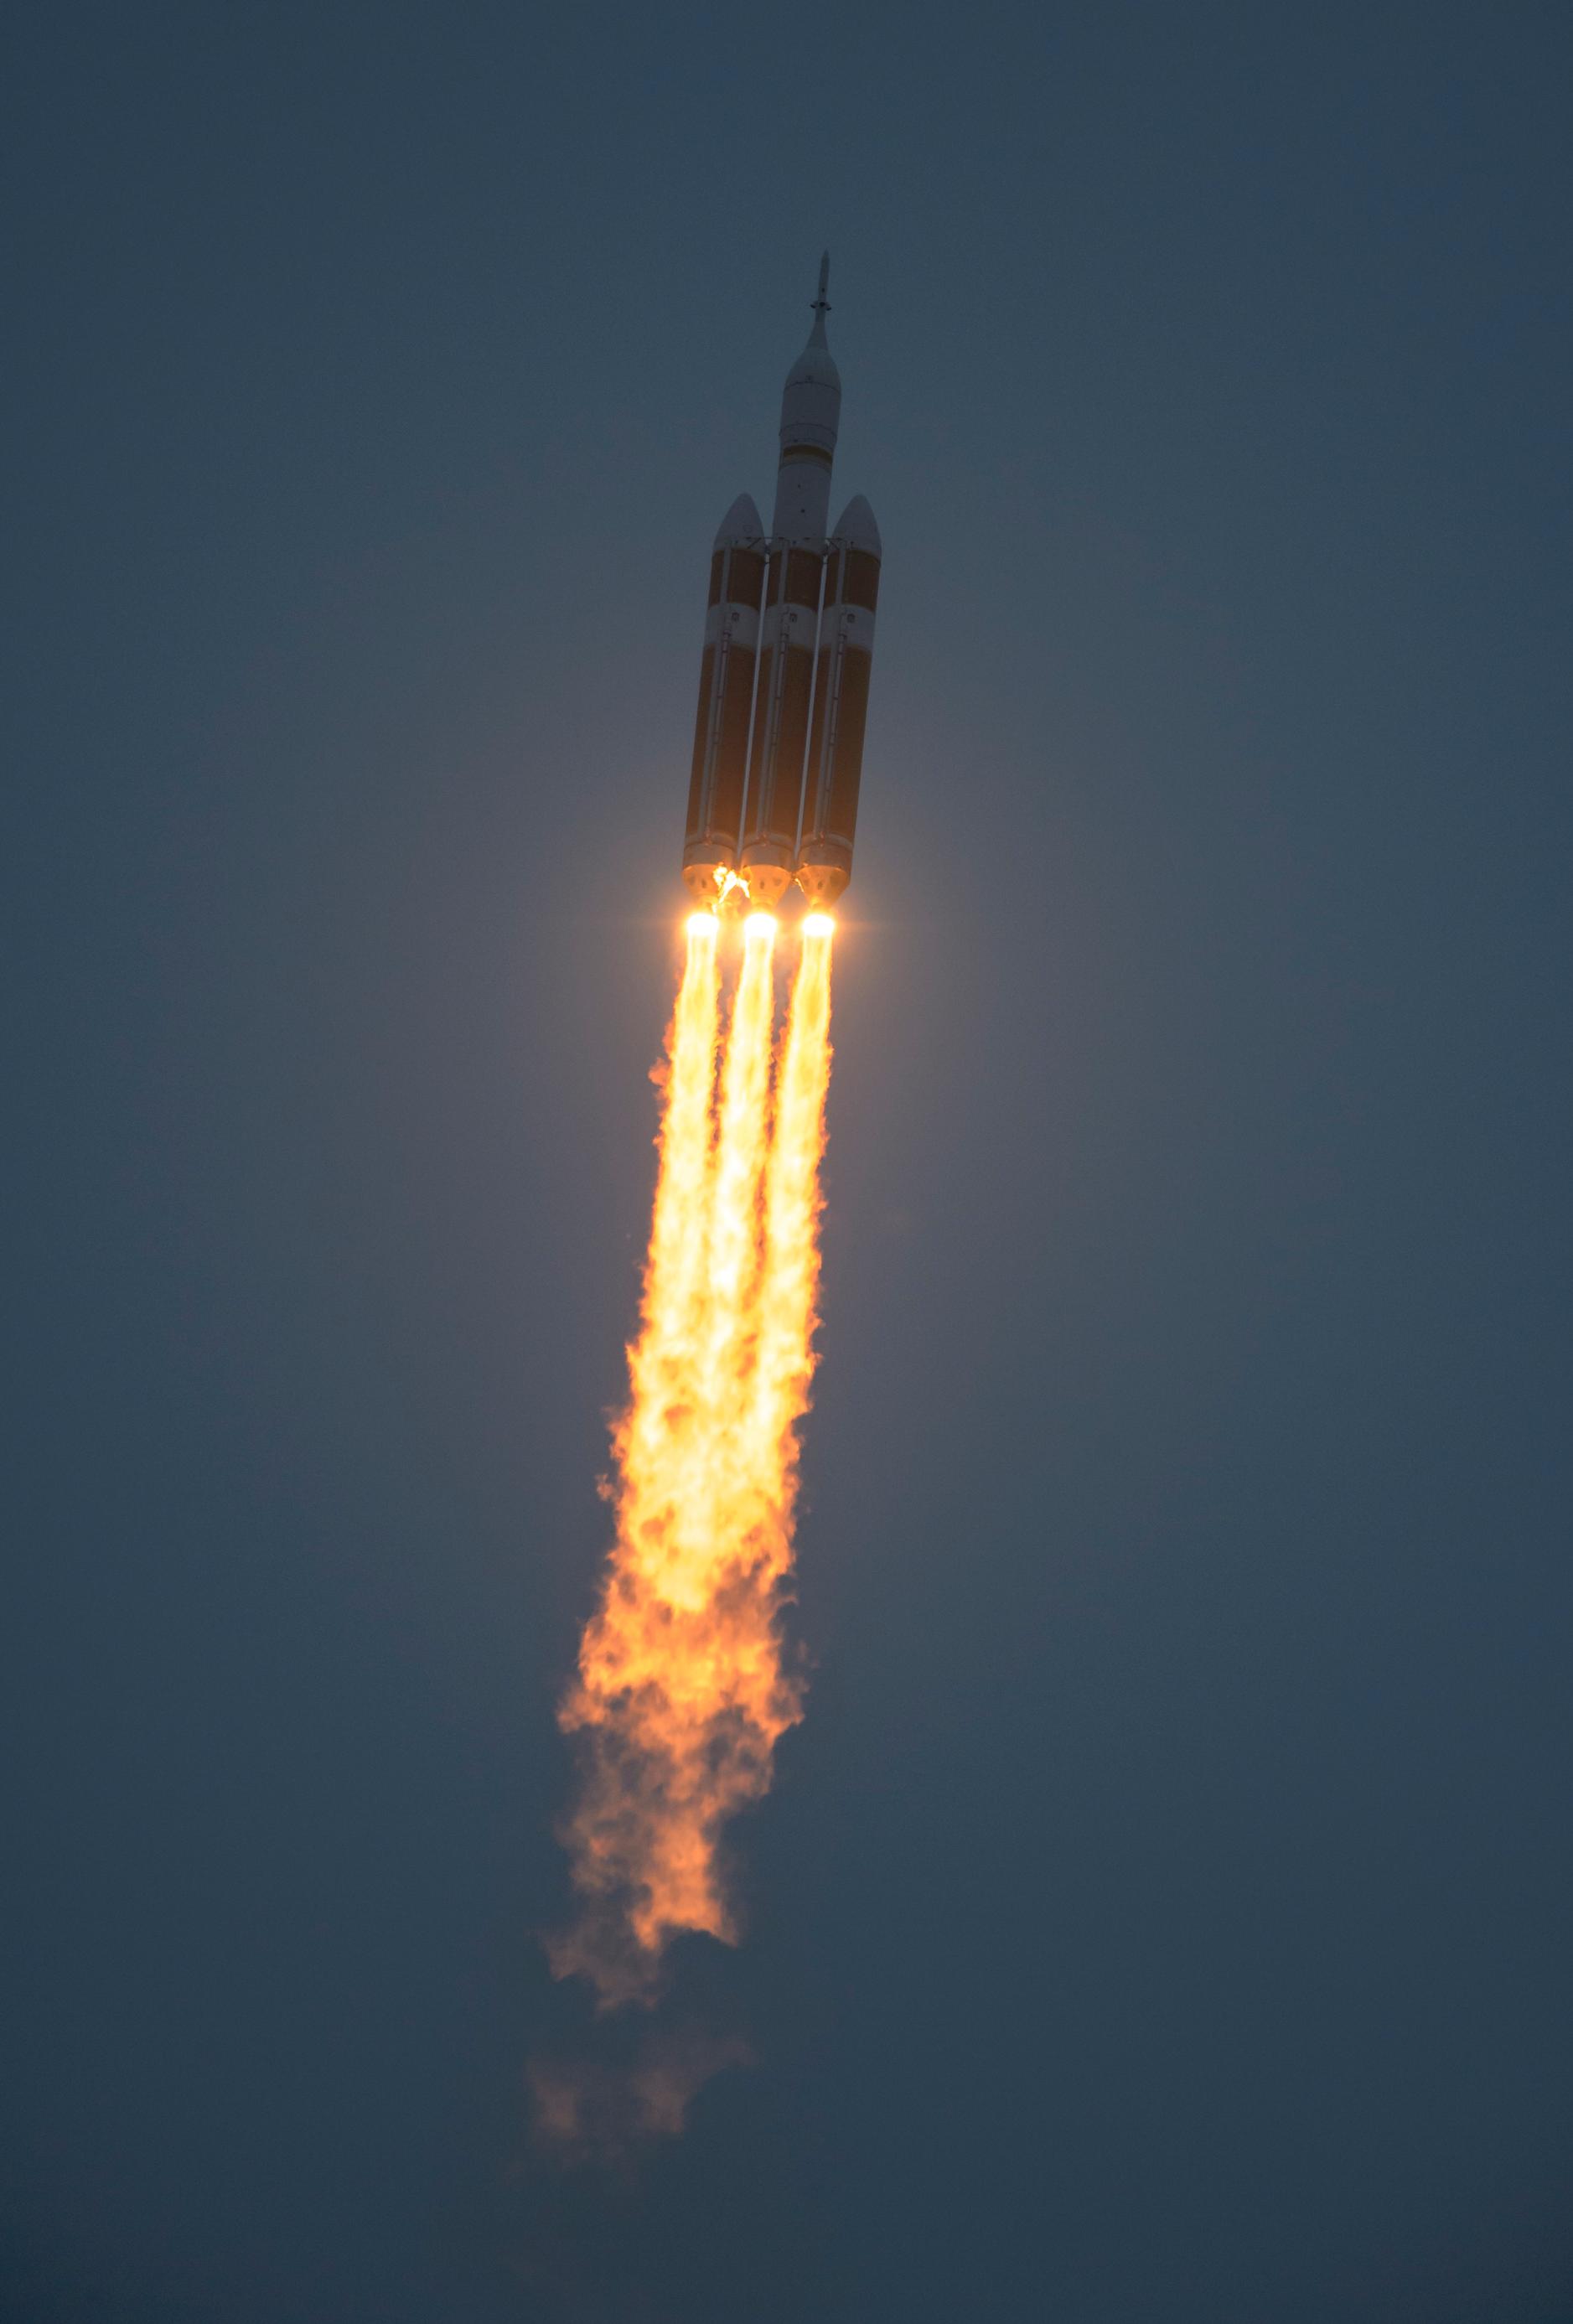 The United Launch Alliance Delta IV Heavy rocket with NASA's Orion spacecraft mounted atop, lifts off from Cape Canaveral Air Force Station's Space Launch Complex 37 at at 7:05 a.m. EST, Friday, Dec. 5, 2014, in Florida.